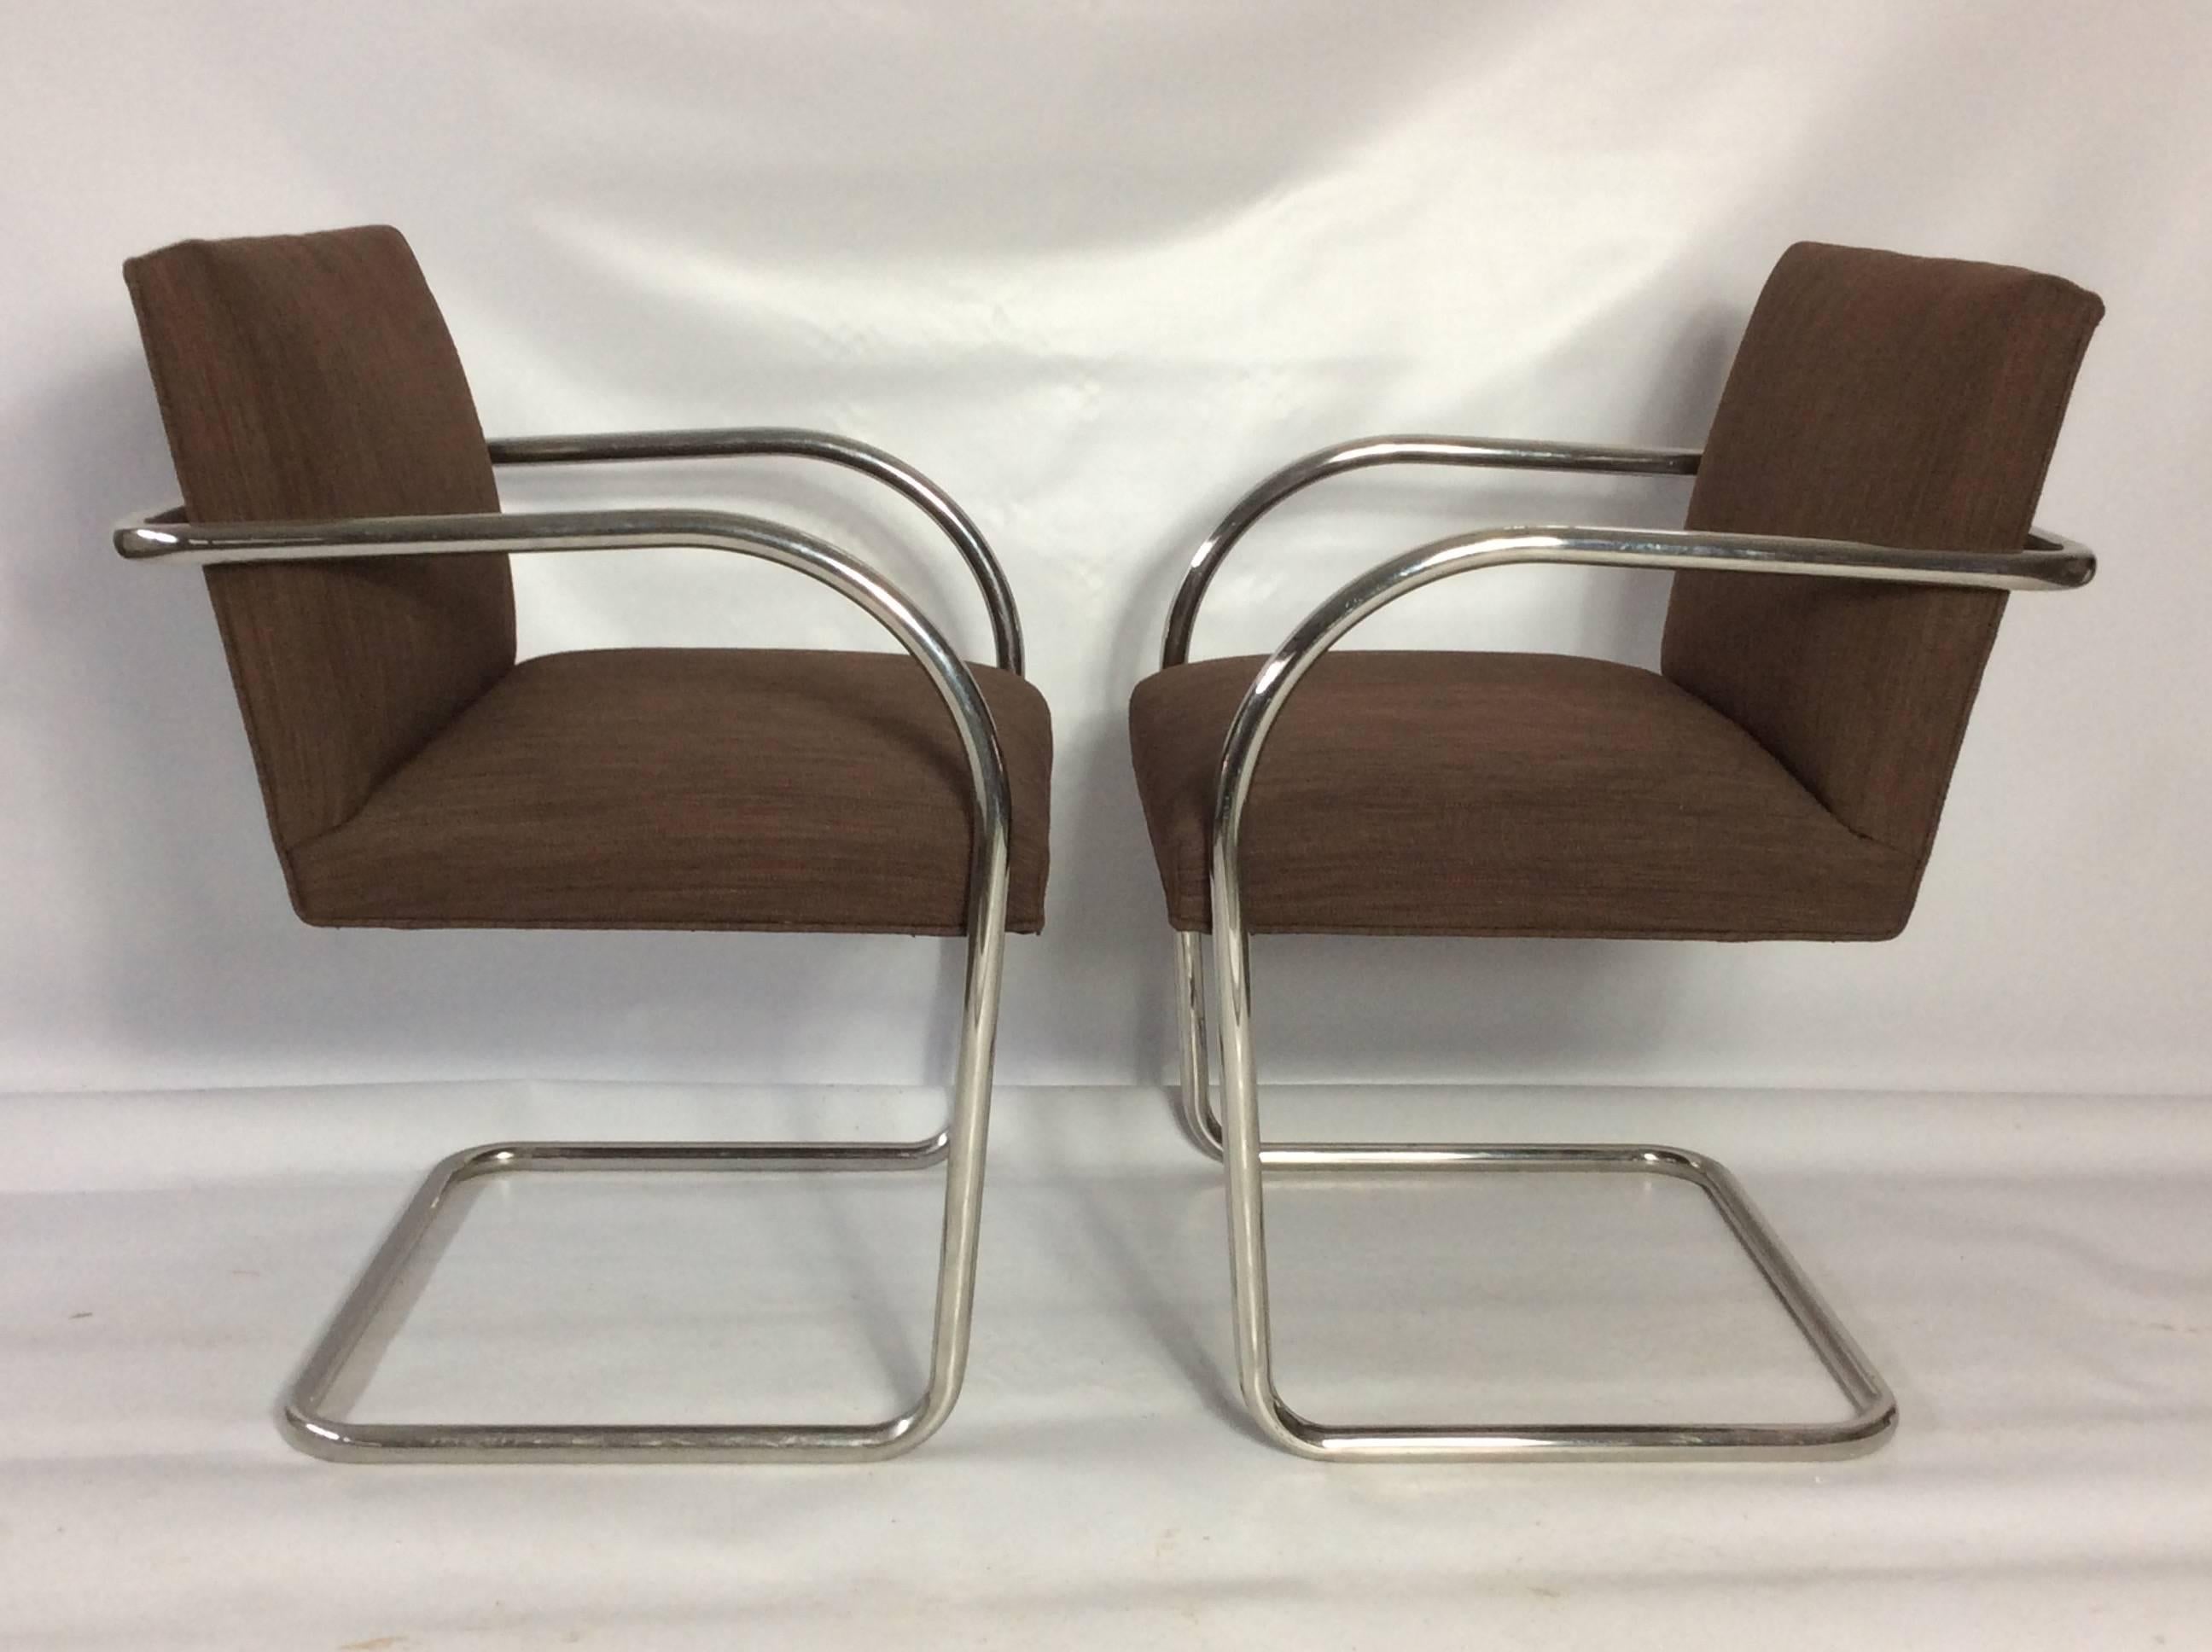 American Pair of Mies Van Der Rohe Tubular Chrome Brno Chairs by Knoll For Sale